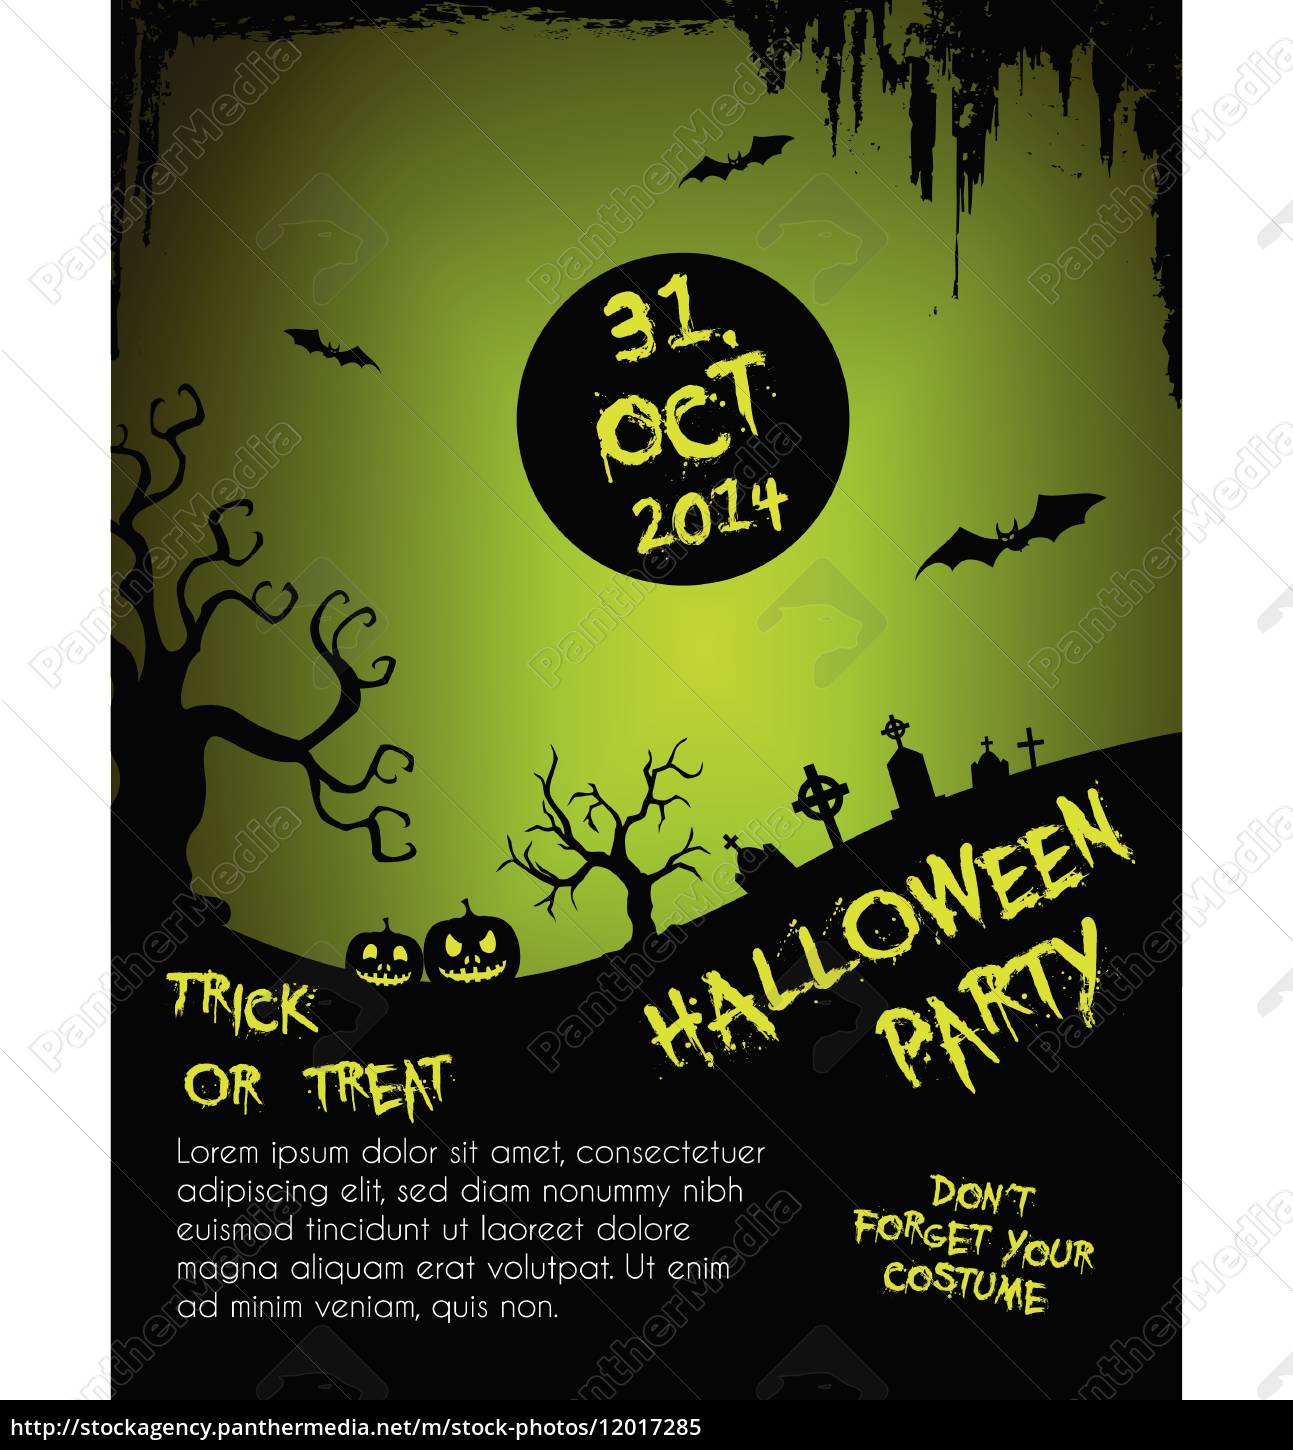 Halloween Party Flyer Template Green And Black Stock Photo Panthermedia Stock Agency